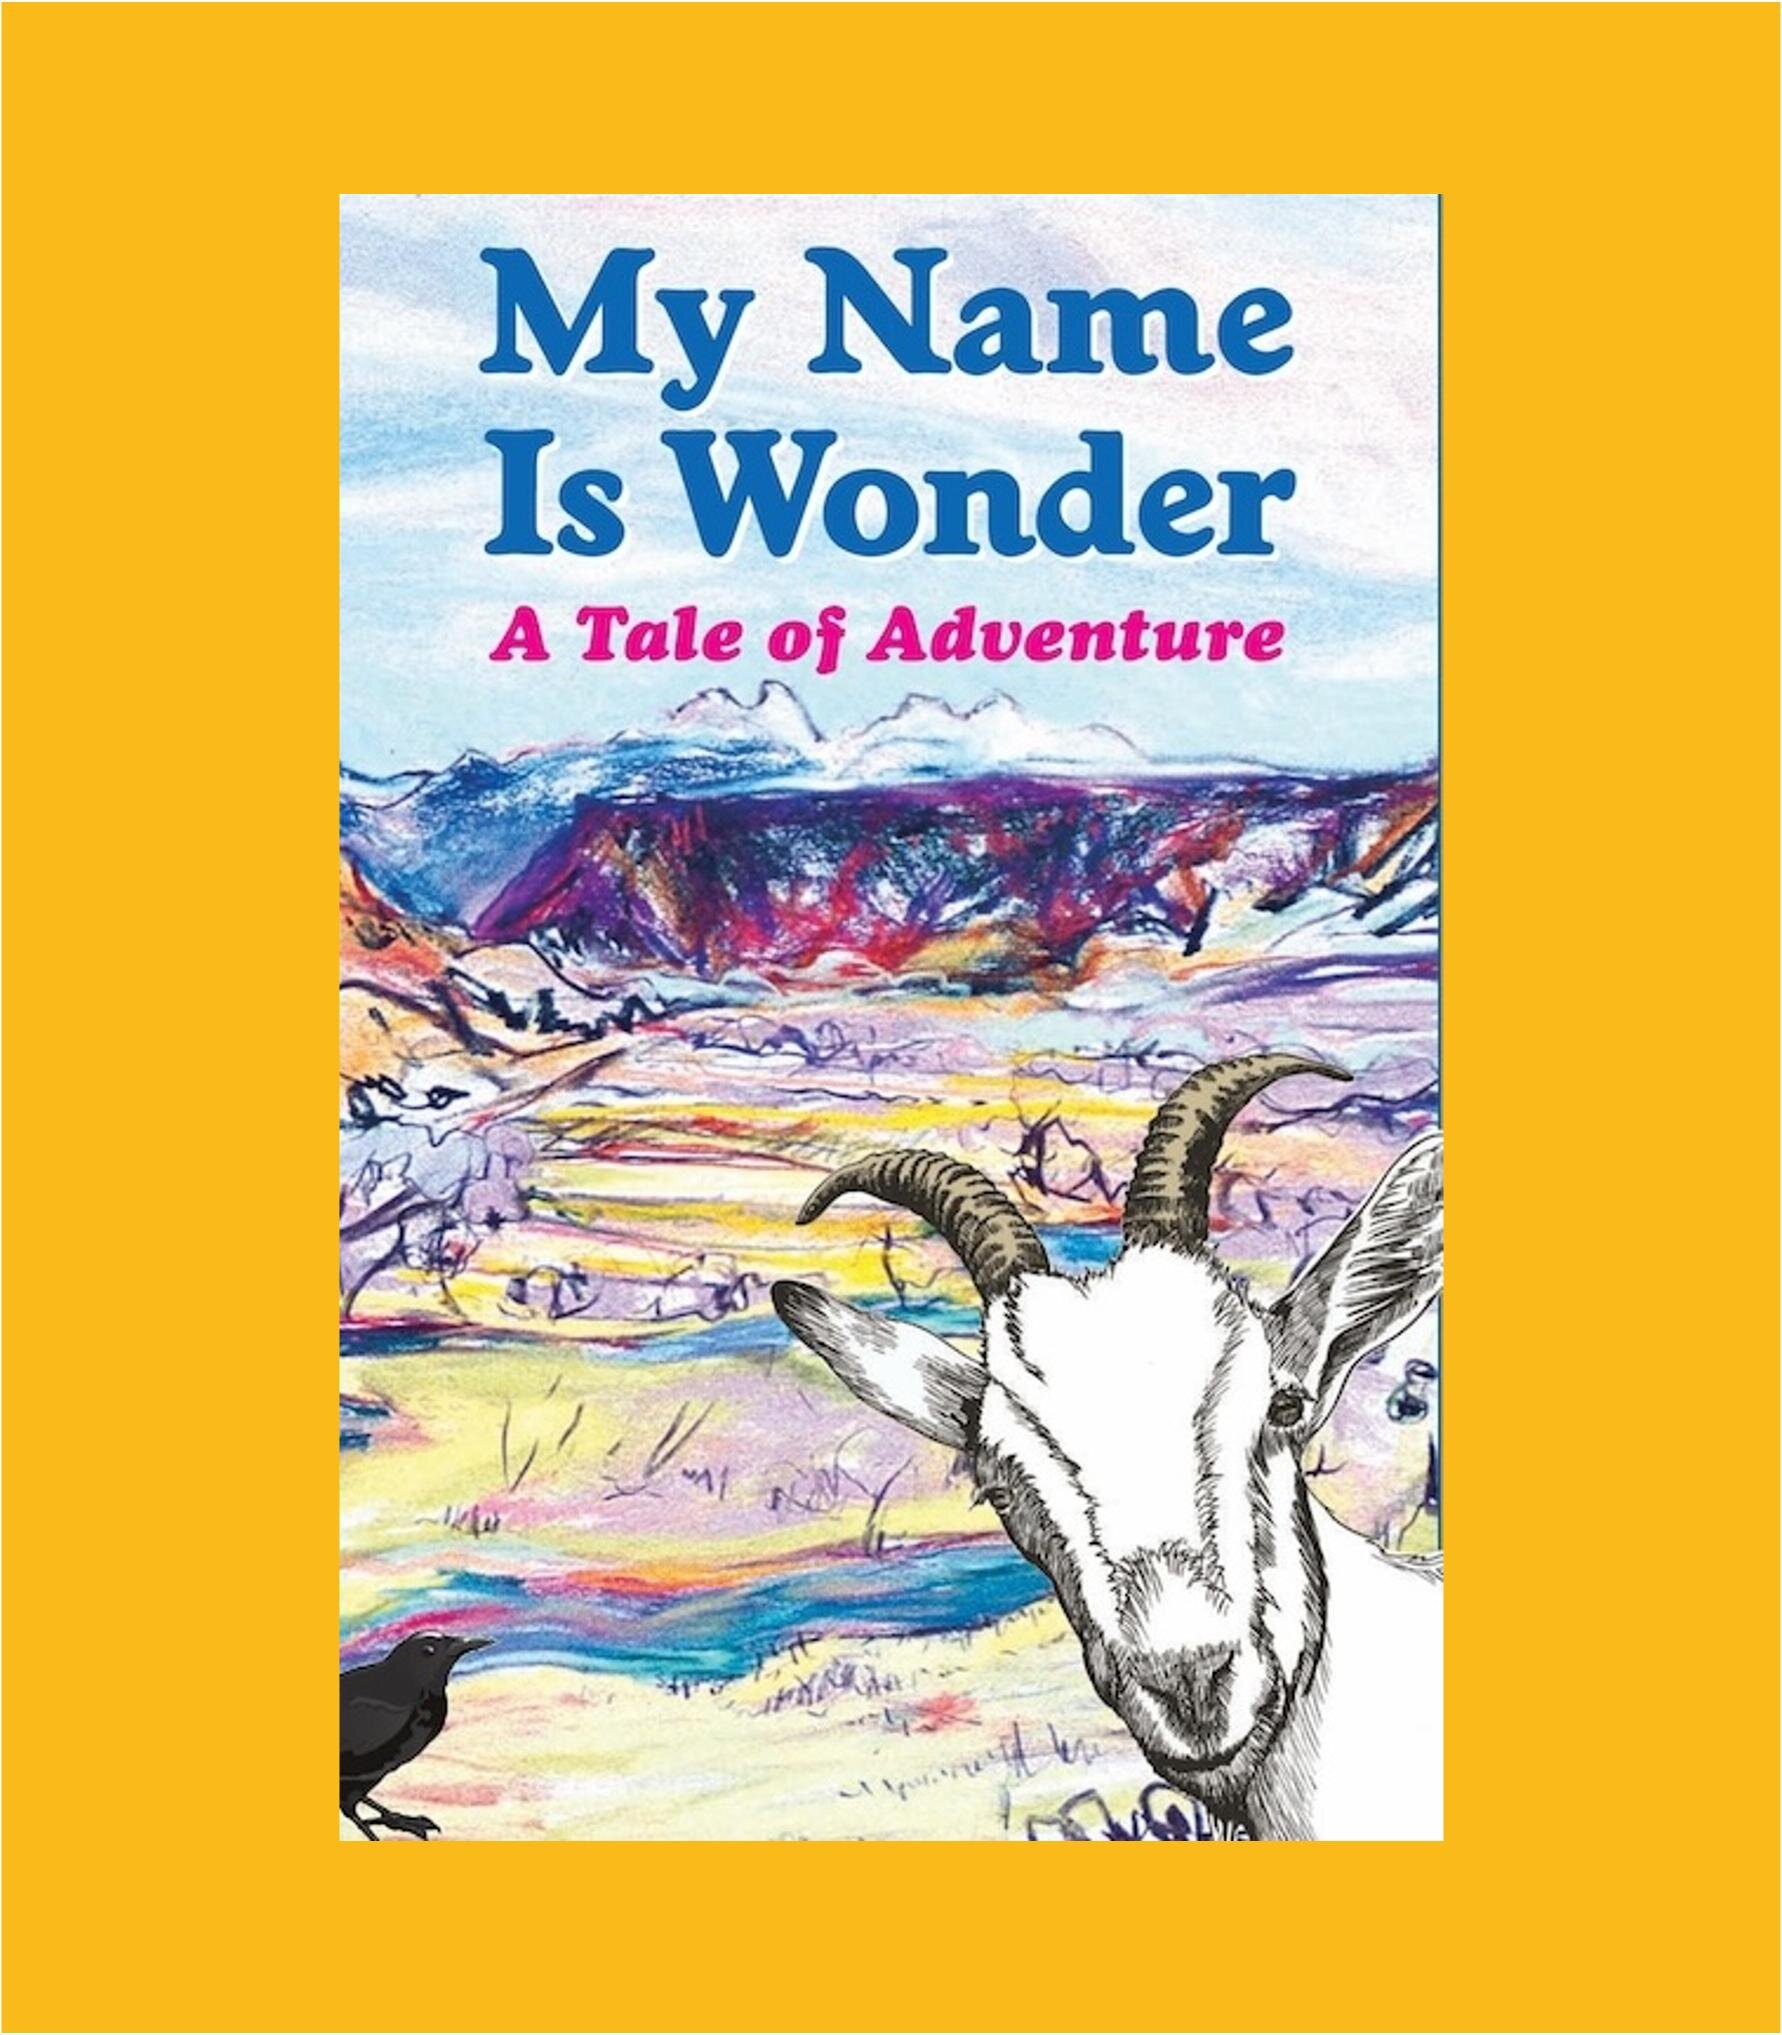 Working up the details of the audio release of My Name is Wonder in the next few weeks, and needed to go back through the archives. Here's the original artwork from Jennet Inglis, and the cover that resulted with addition of Wonder, an exceptional go